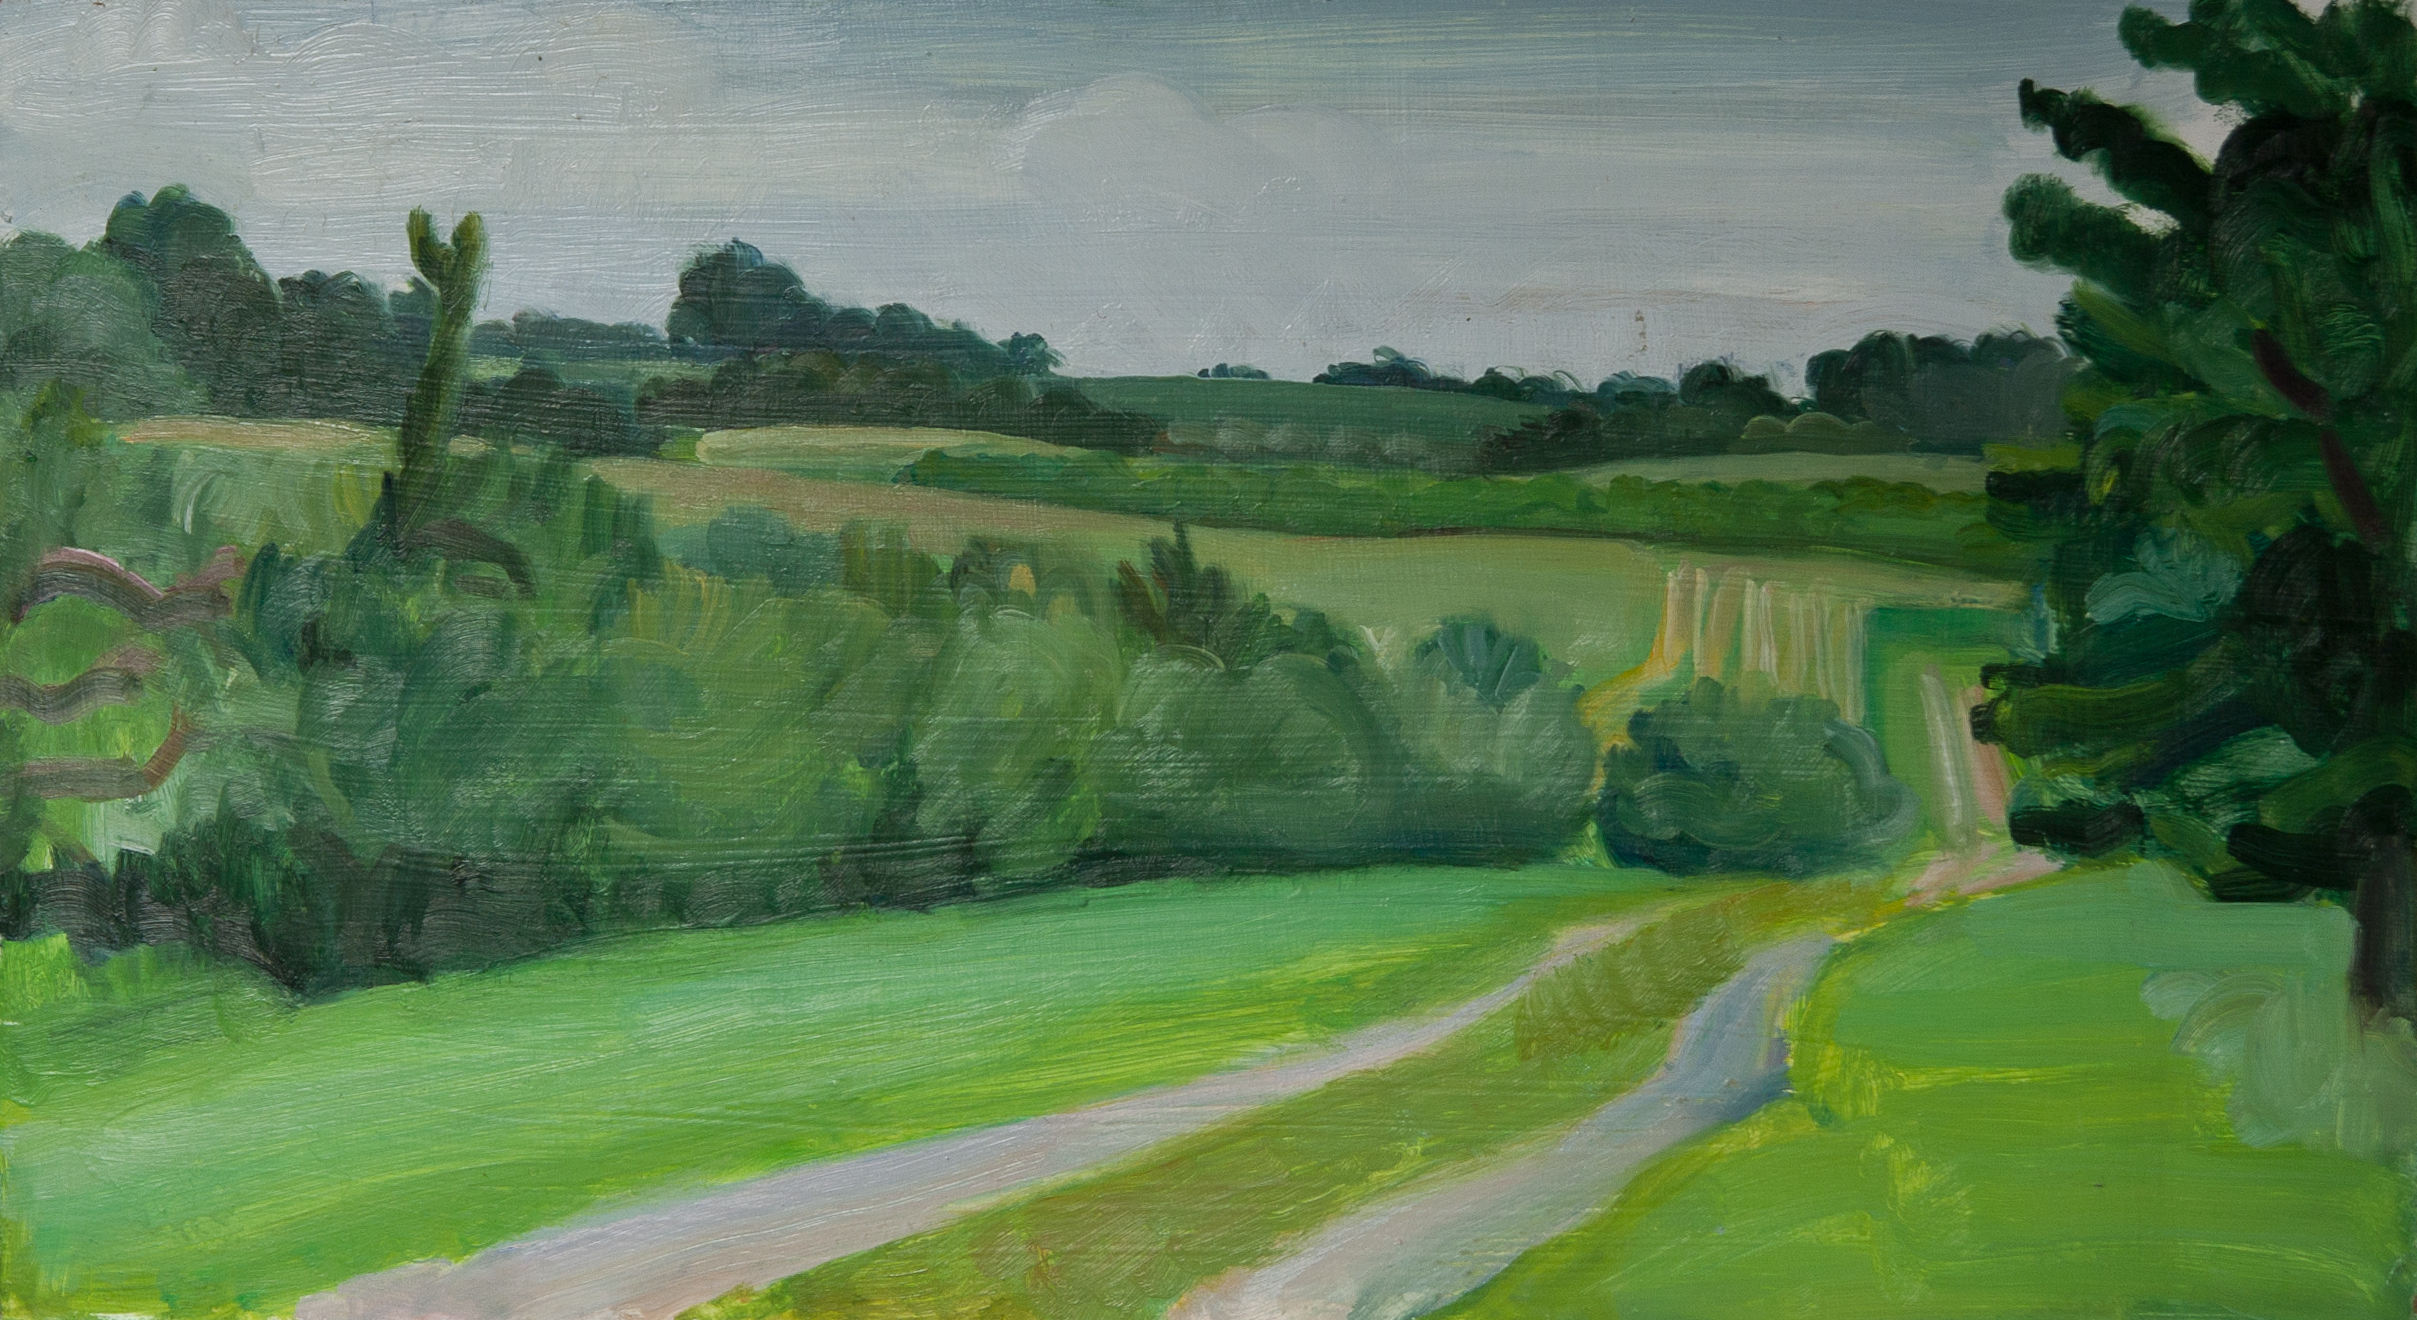   Orchard Road, Overcast , 1996, oil on panel, 10" x 18" (Private collection) 